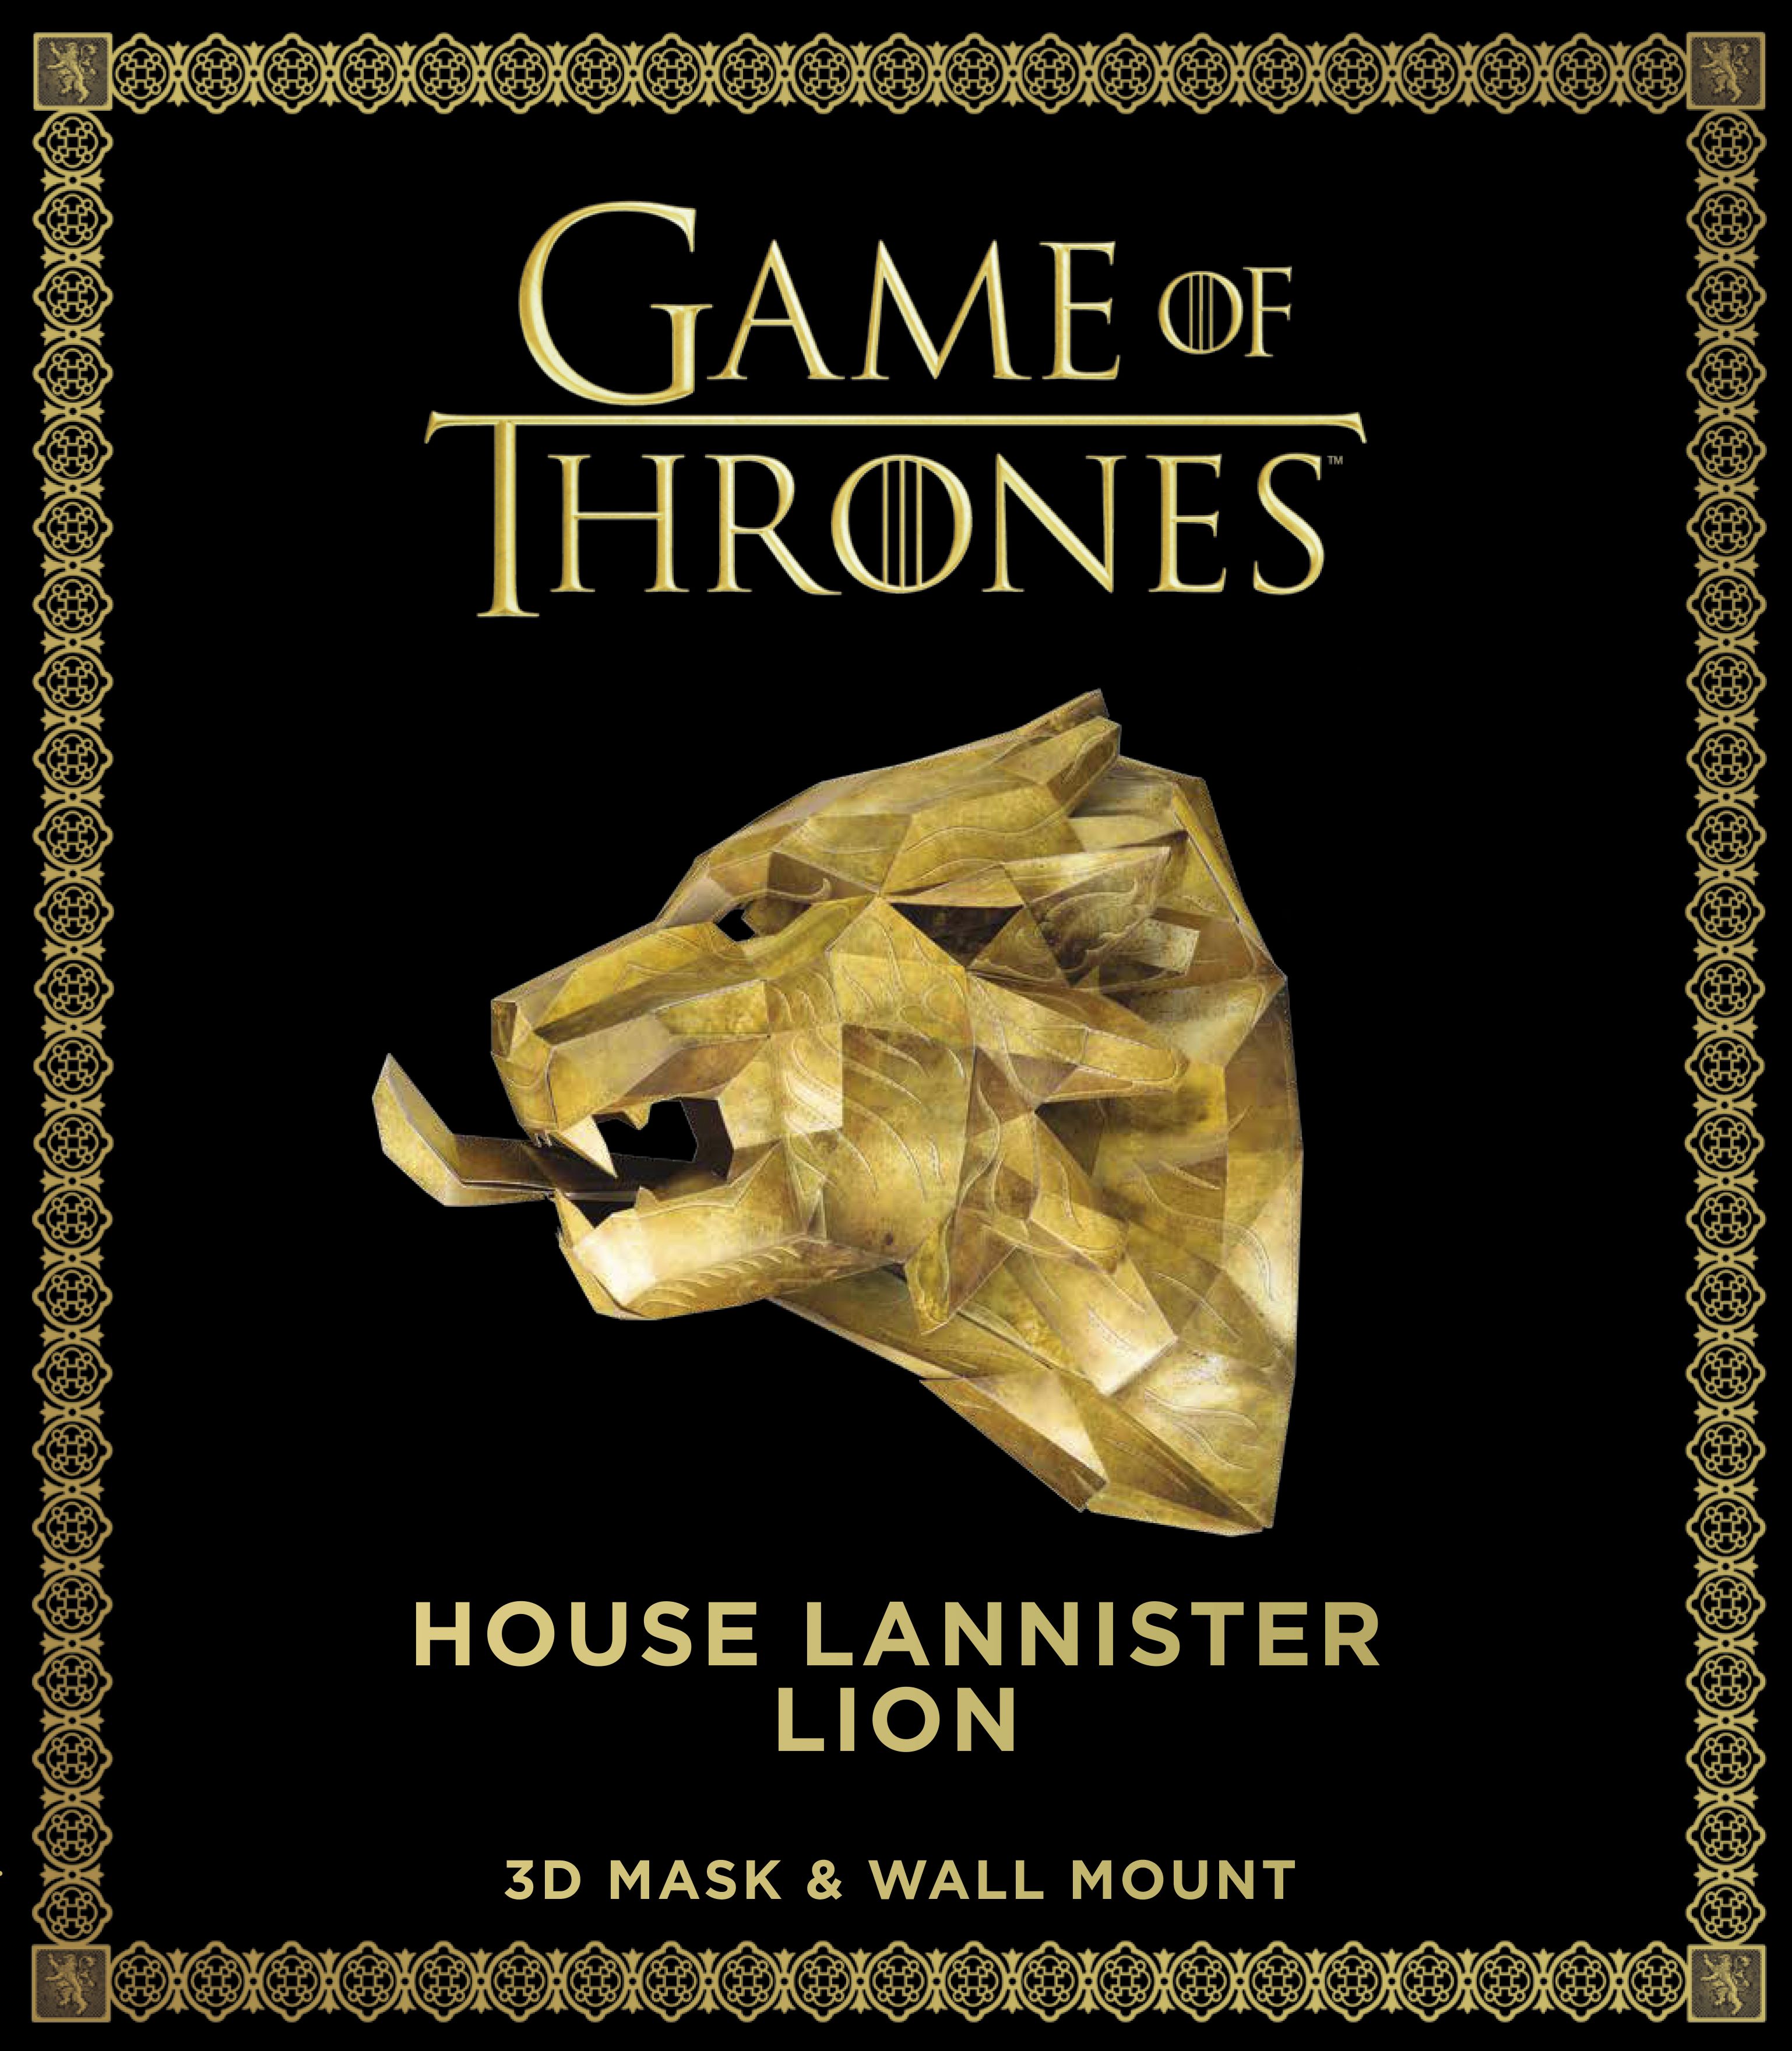 Game of Thrones Mask House Lannister Lion (3D Mask & Wall Mount)